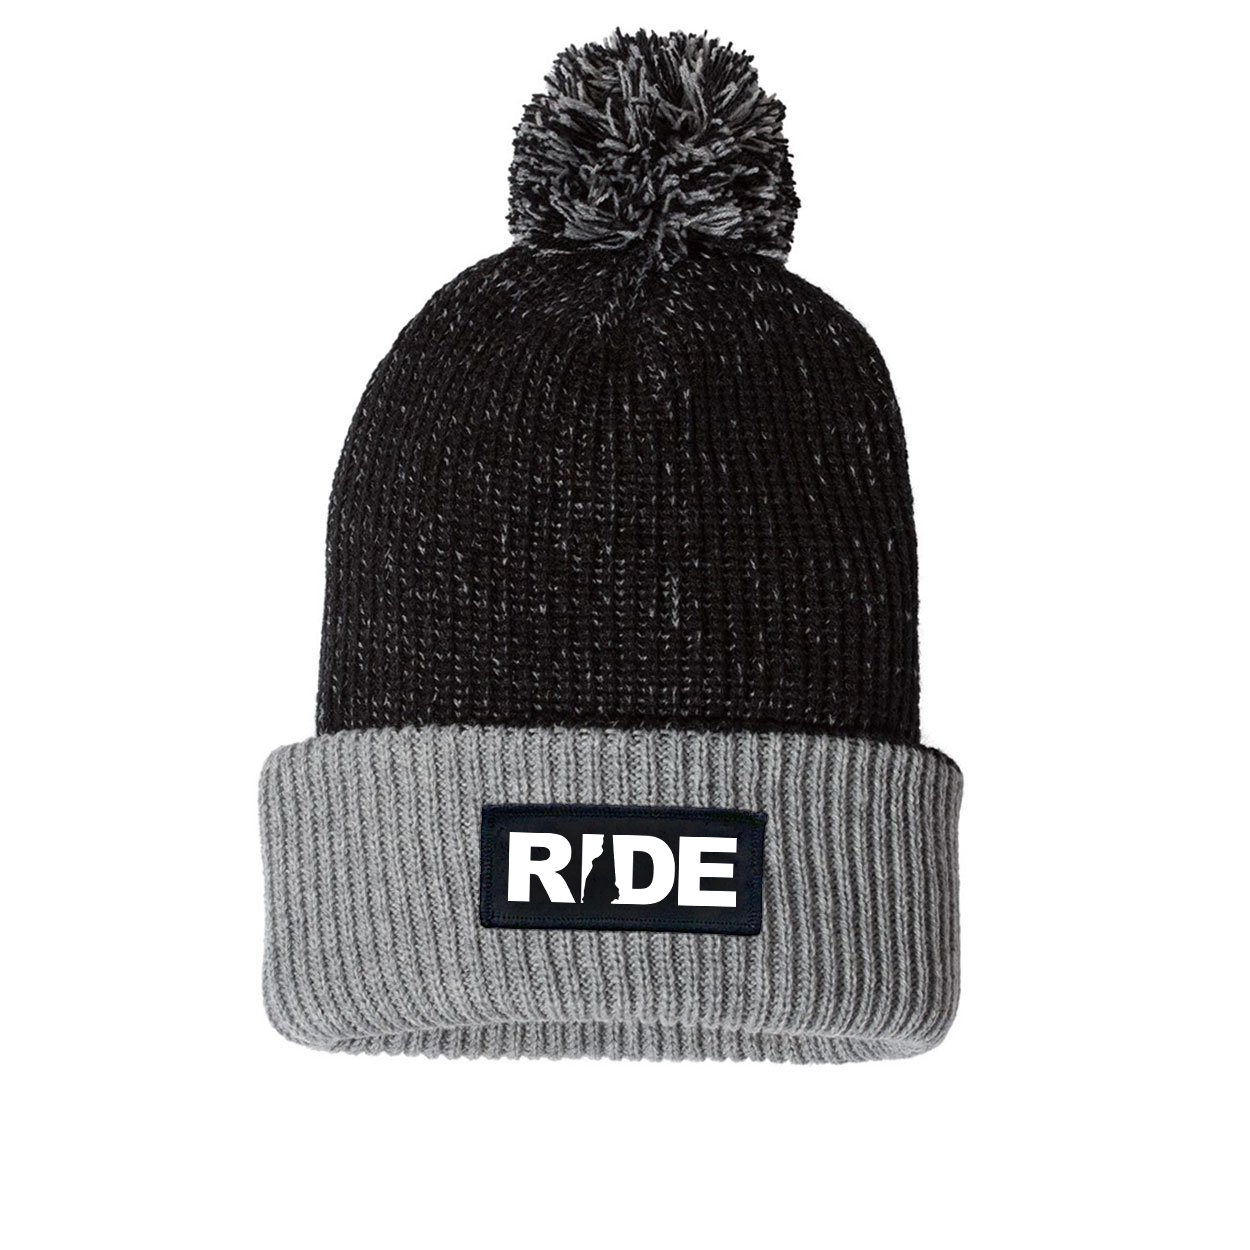 Ride New Hampshire Night Out Woven Patch Roll Up Pom Knit Beanie Black/Gray (White Logo)